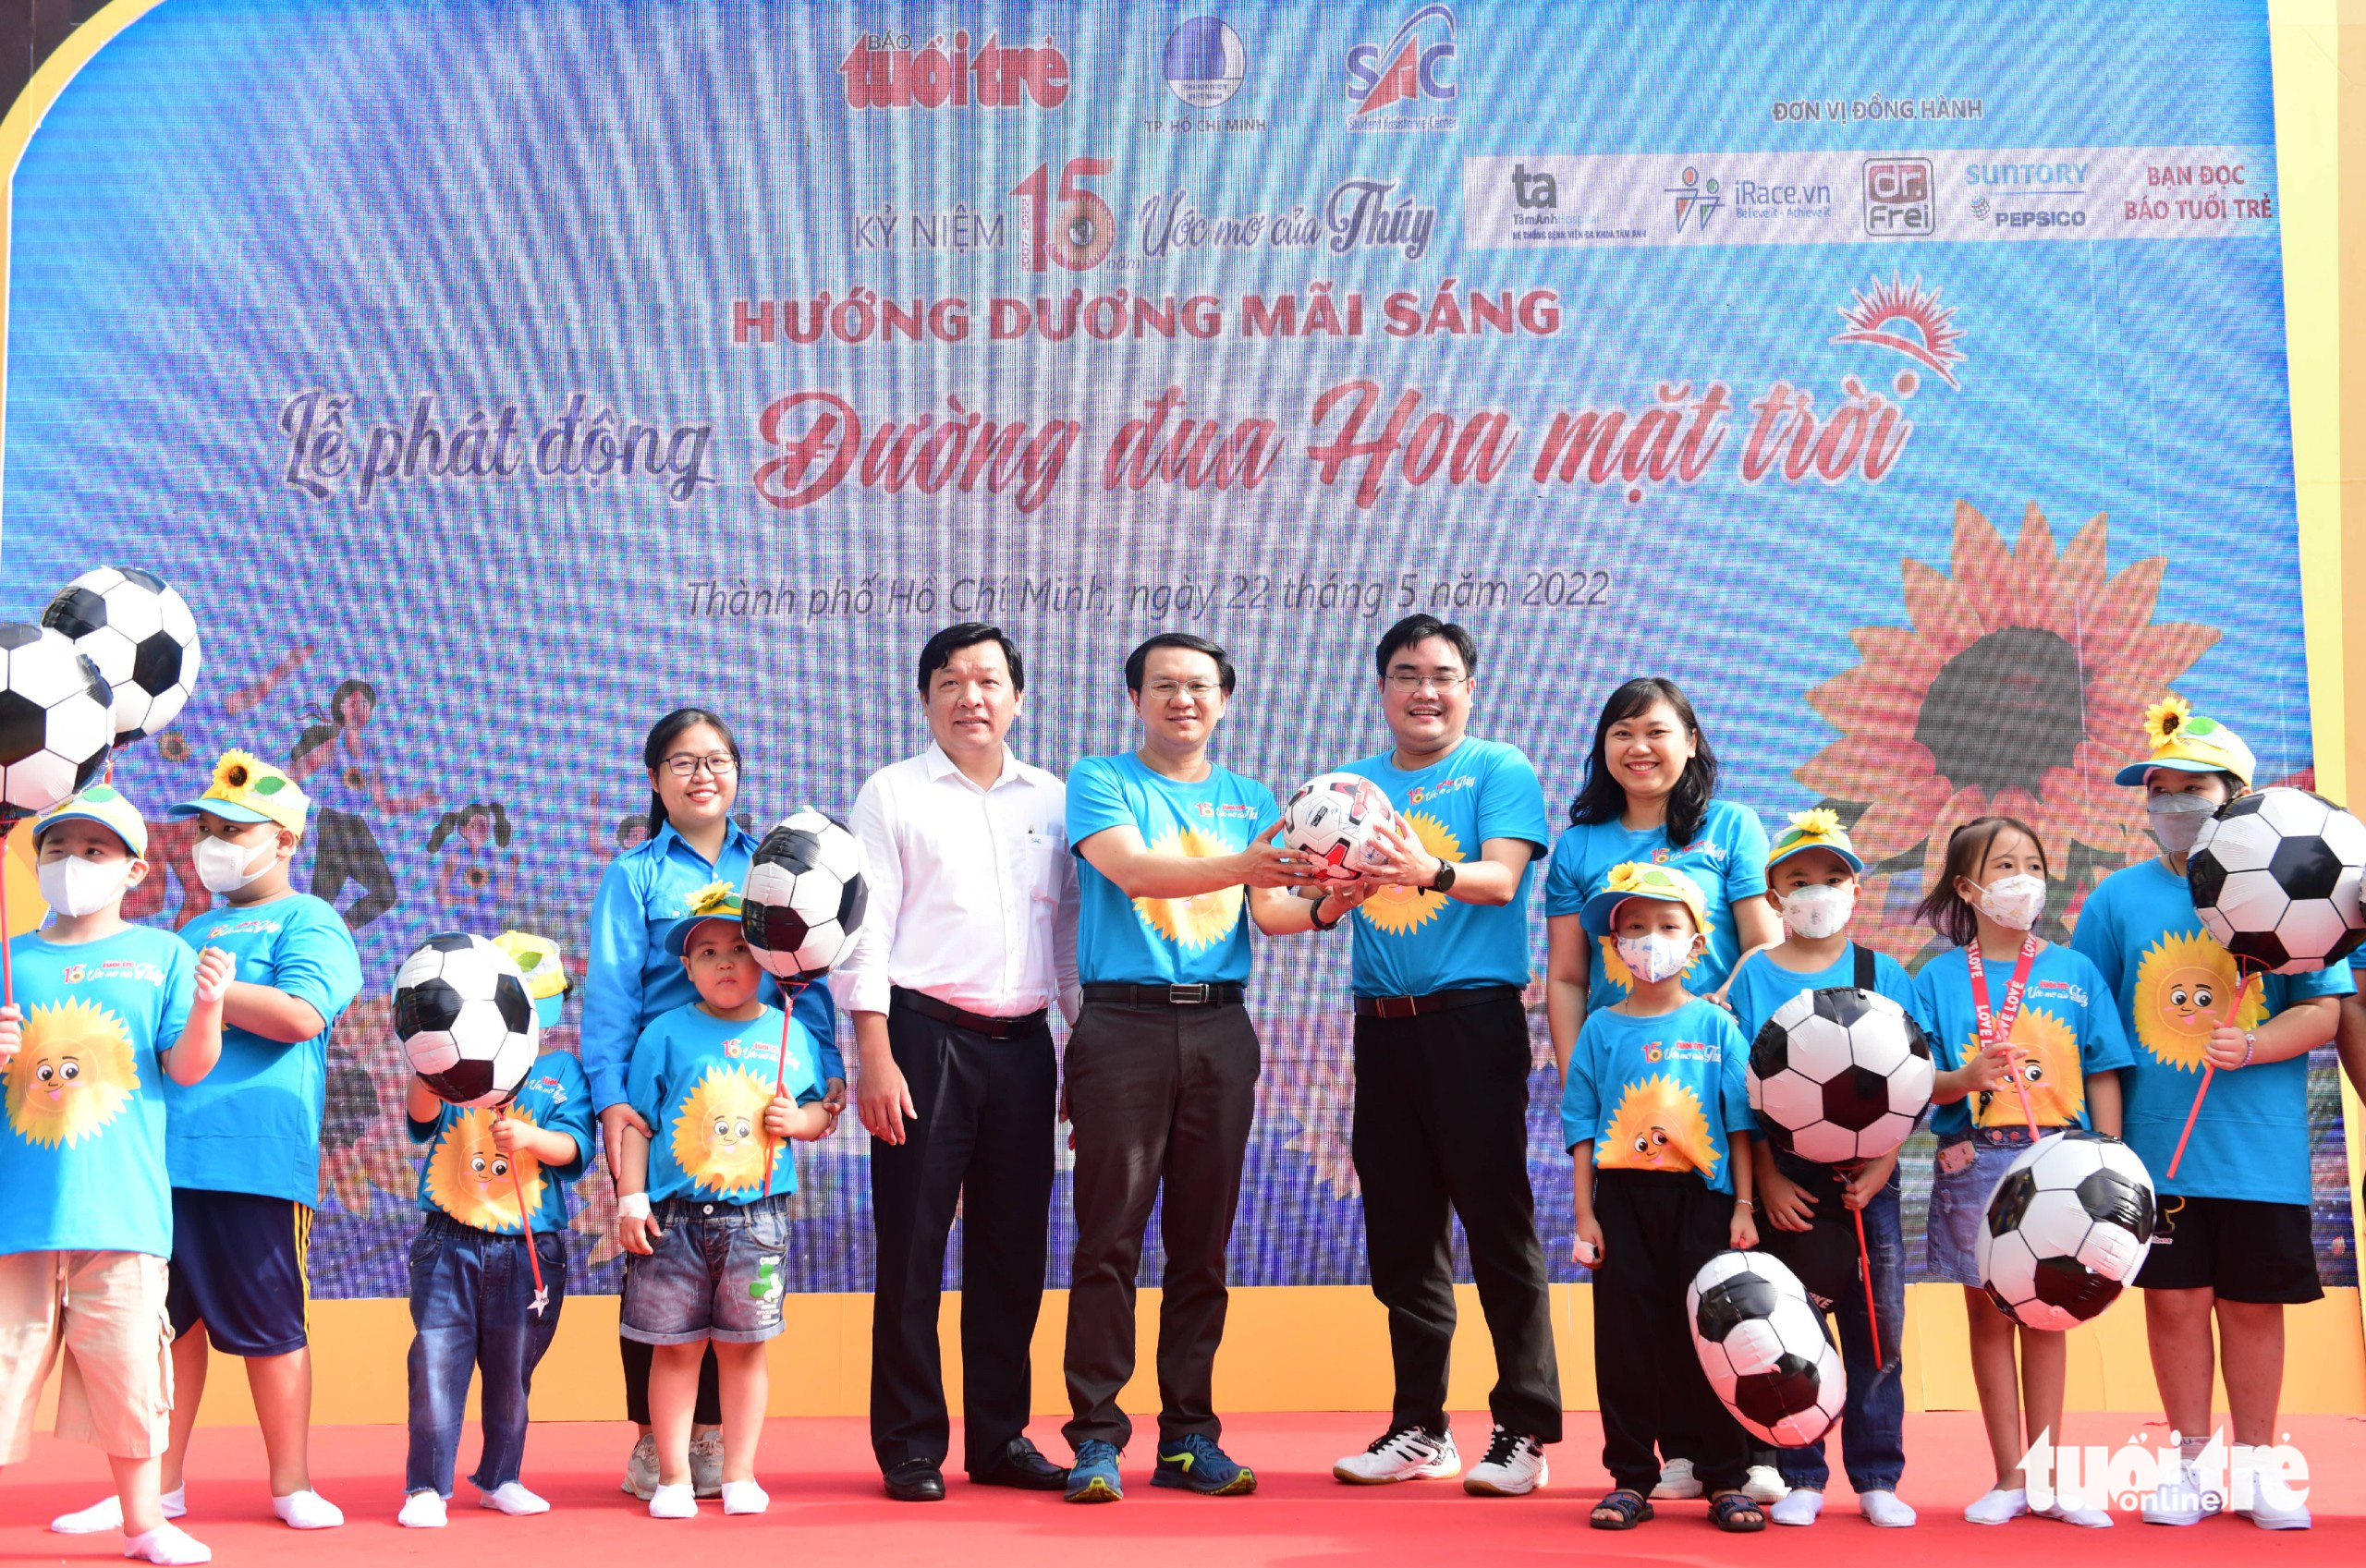 A ball signed by members of the U23 Vietnamese men’s football team is presented at the event in Ho Chi Minh City, May 22, 2022. Photo: Duyen Phan / Tuoi Tre